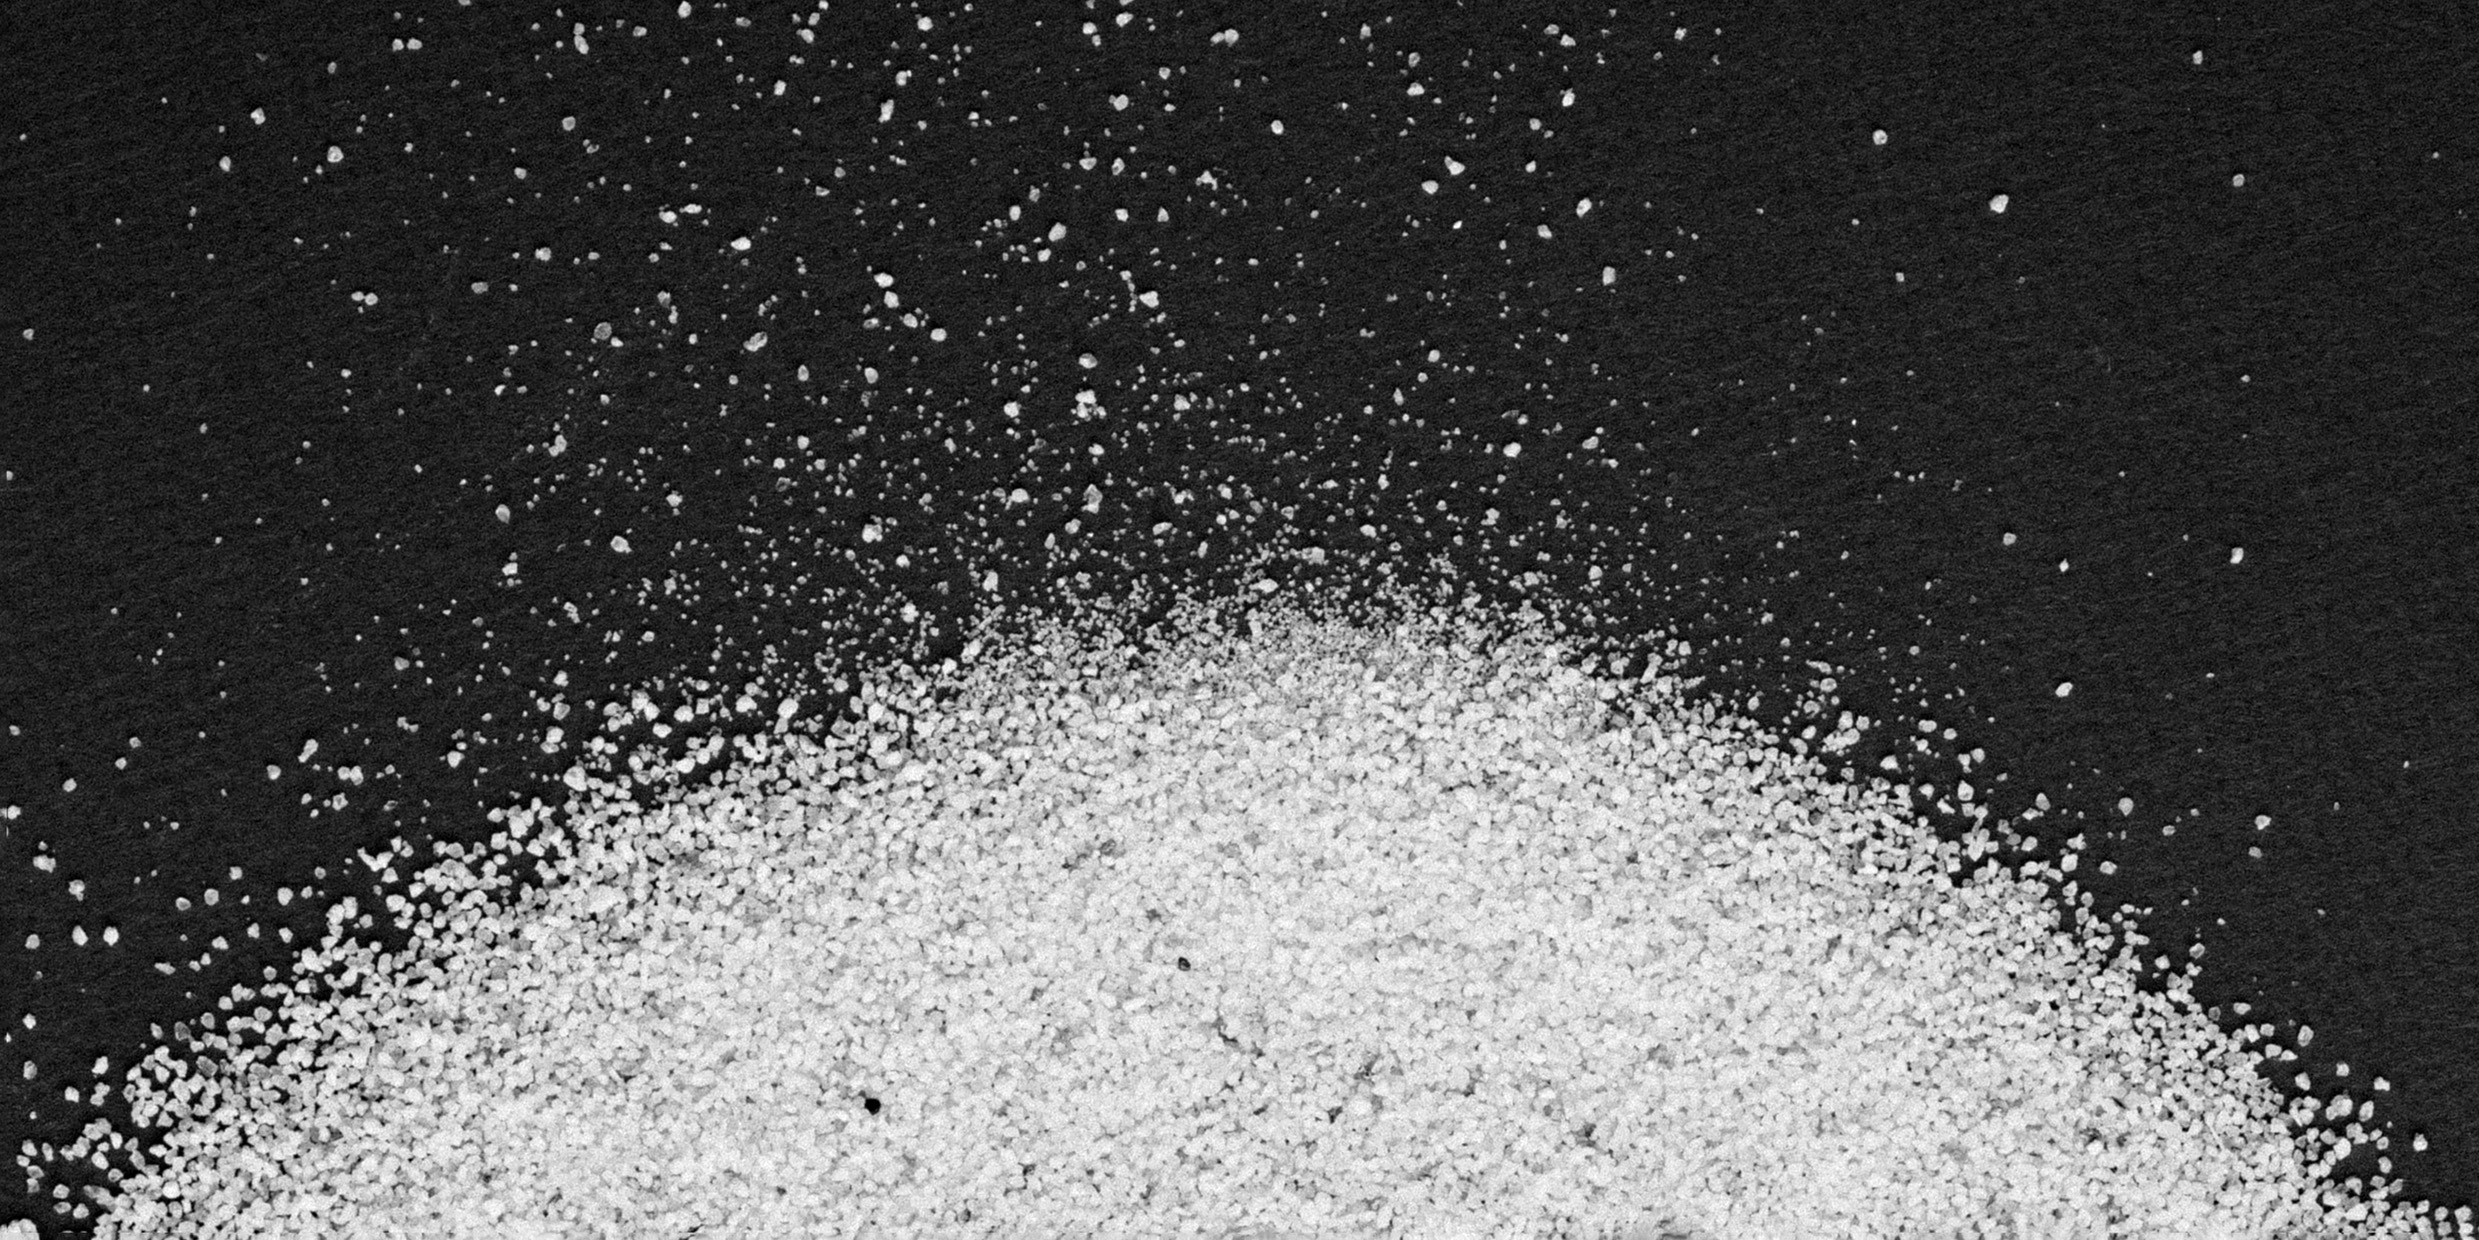 Image of pile of sugar crystals on a black background